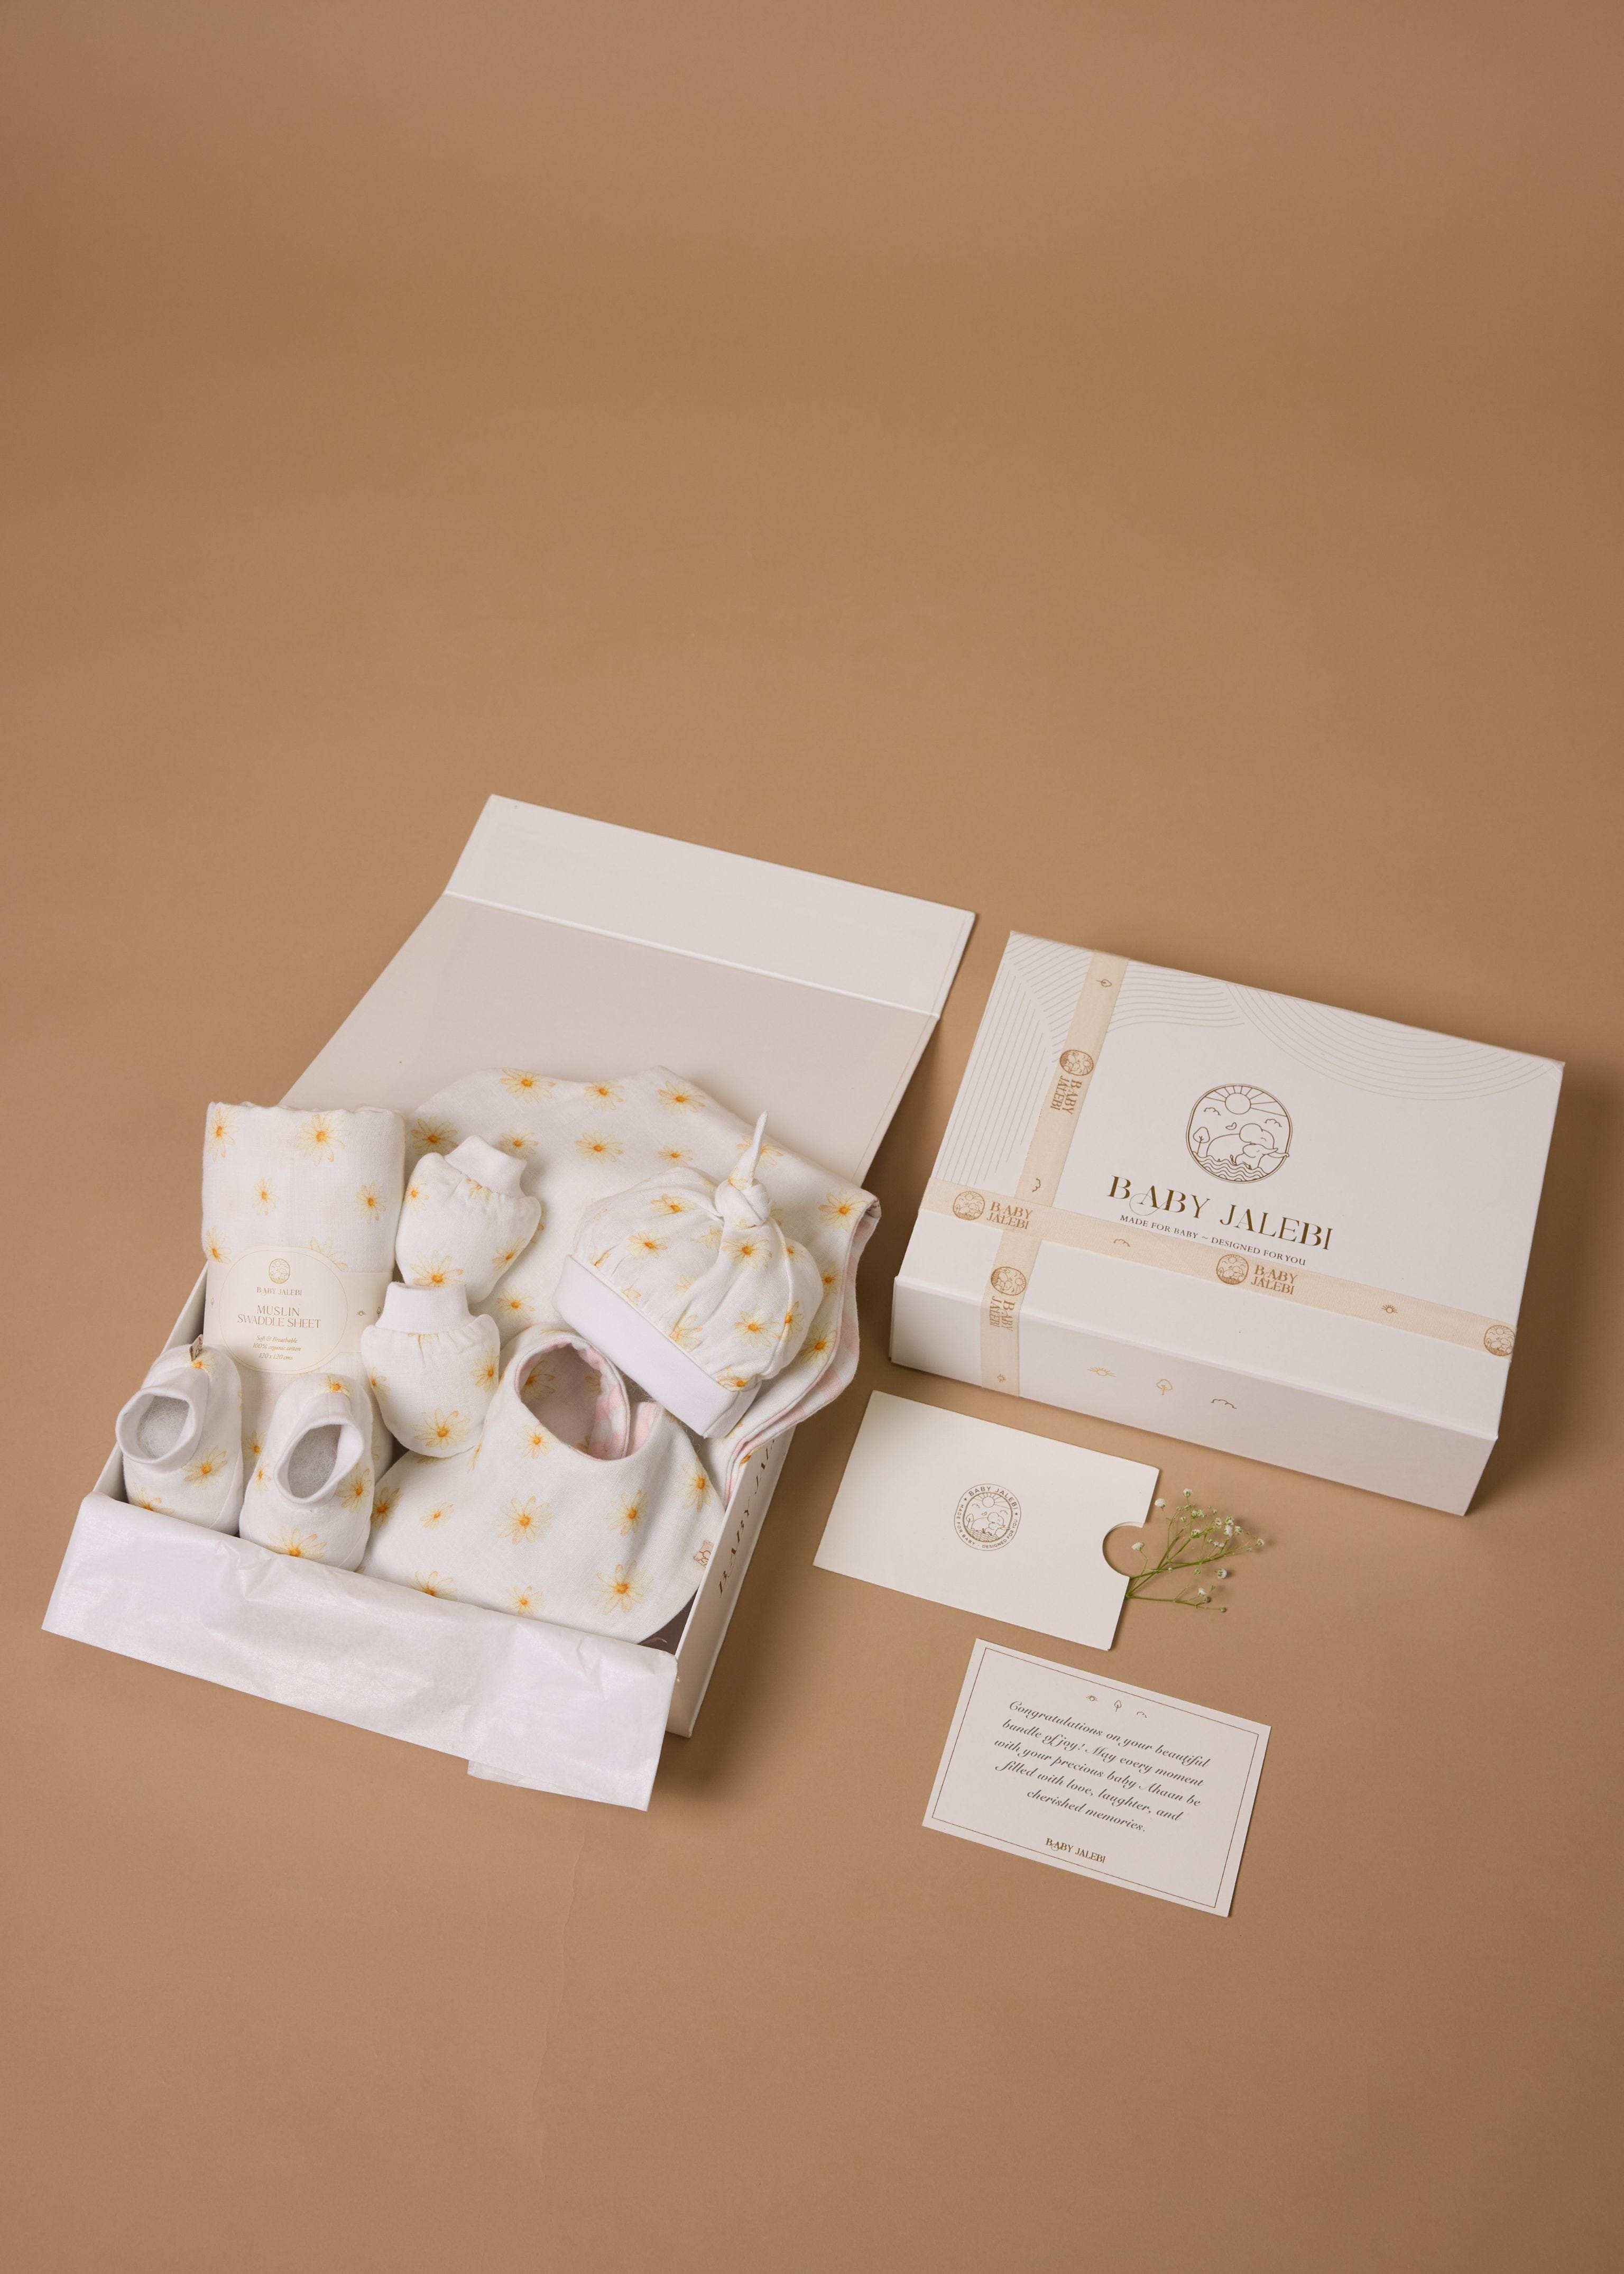 Arabesque dreams Welcome baby Gift Box